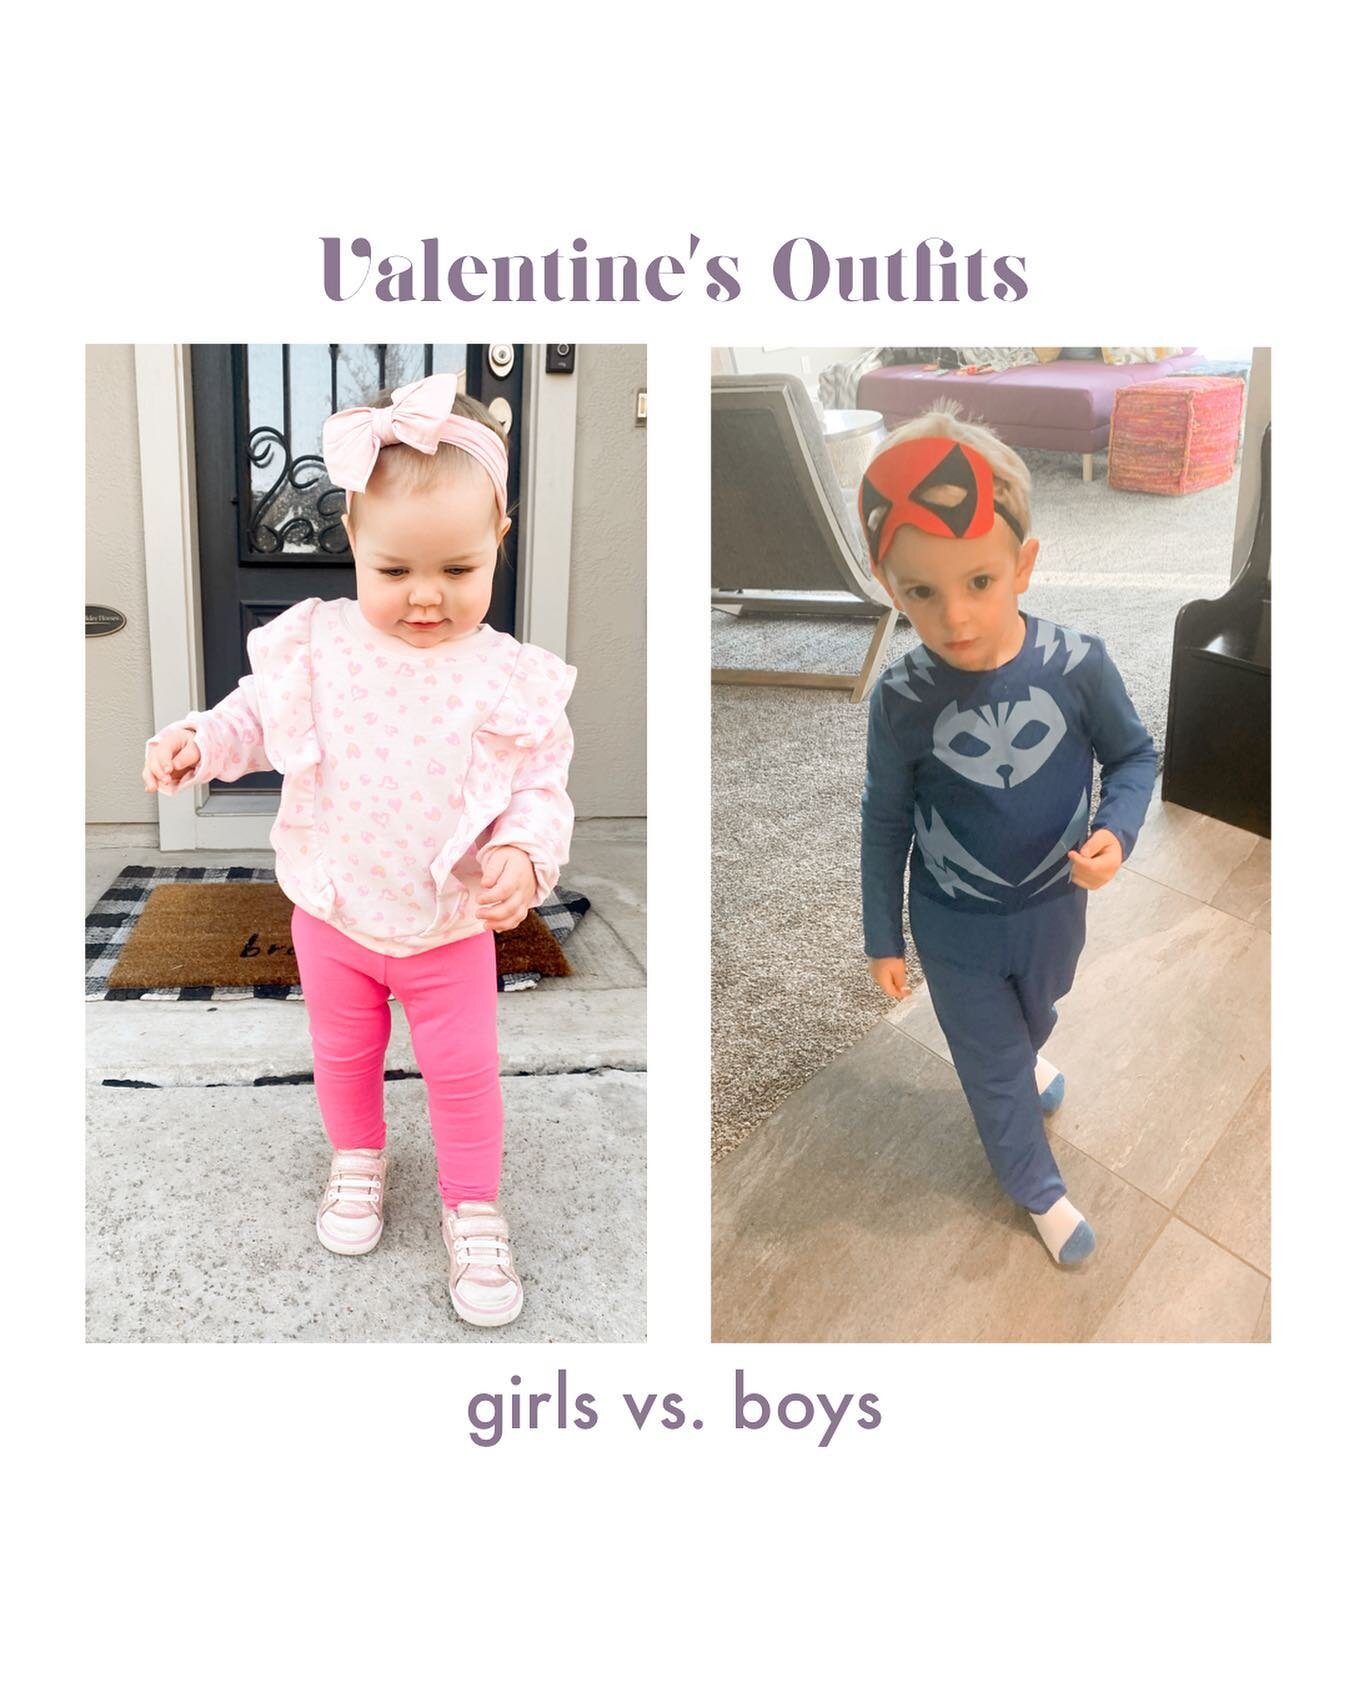 Elliott and Jack have very different takes on Valentine&rsquo;s Day. 😍😂
Tag us in your pictures tomorrow! We love seeing your cuties. 💝 #valentinesday